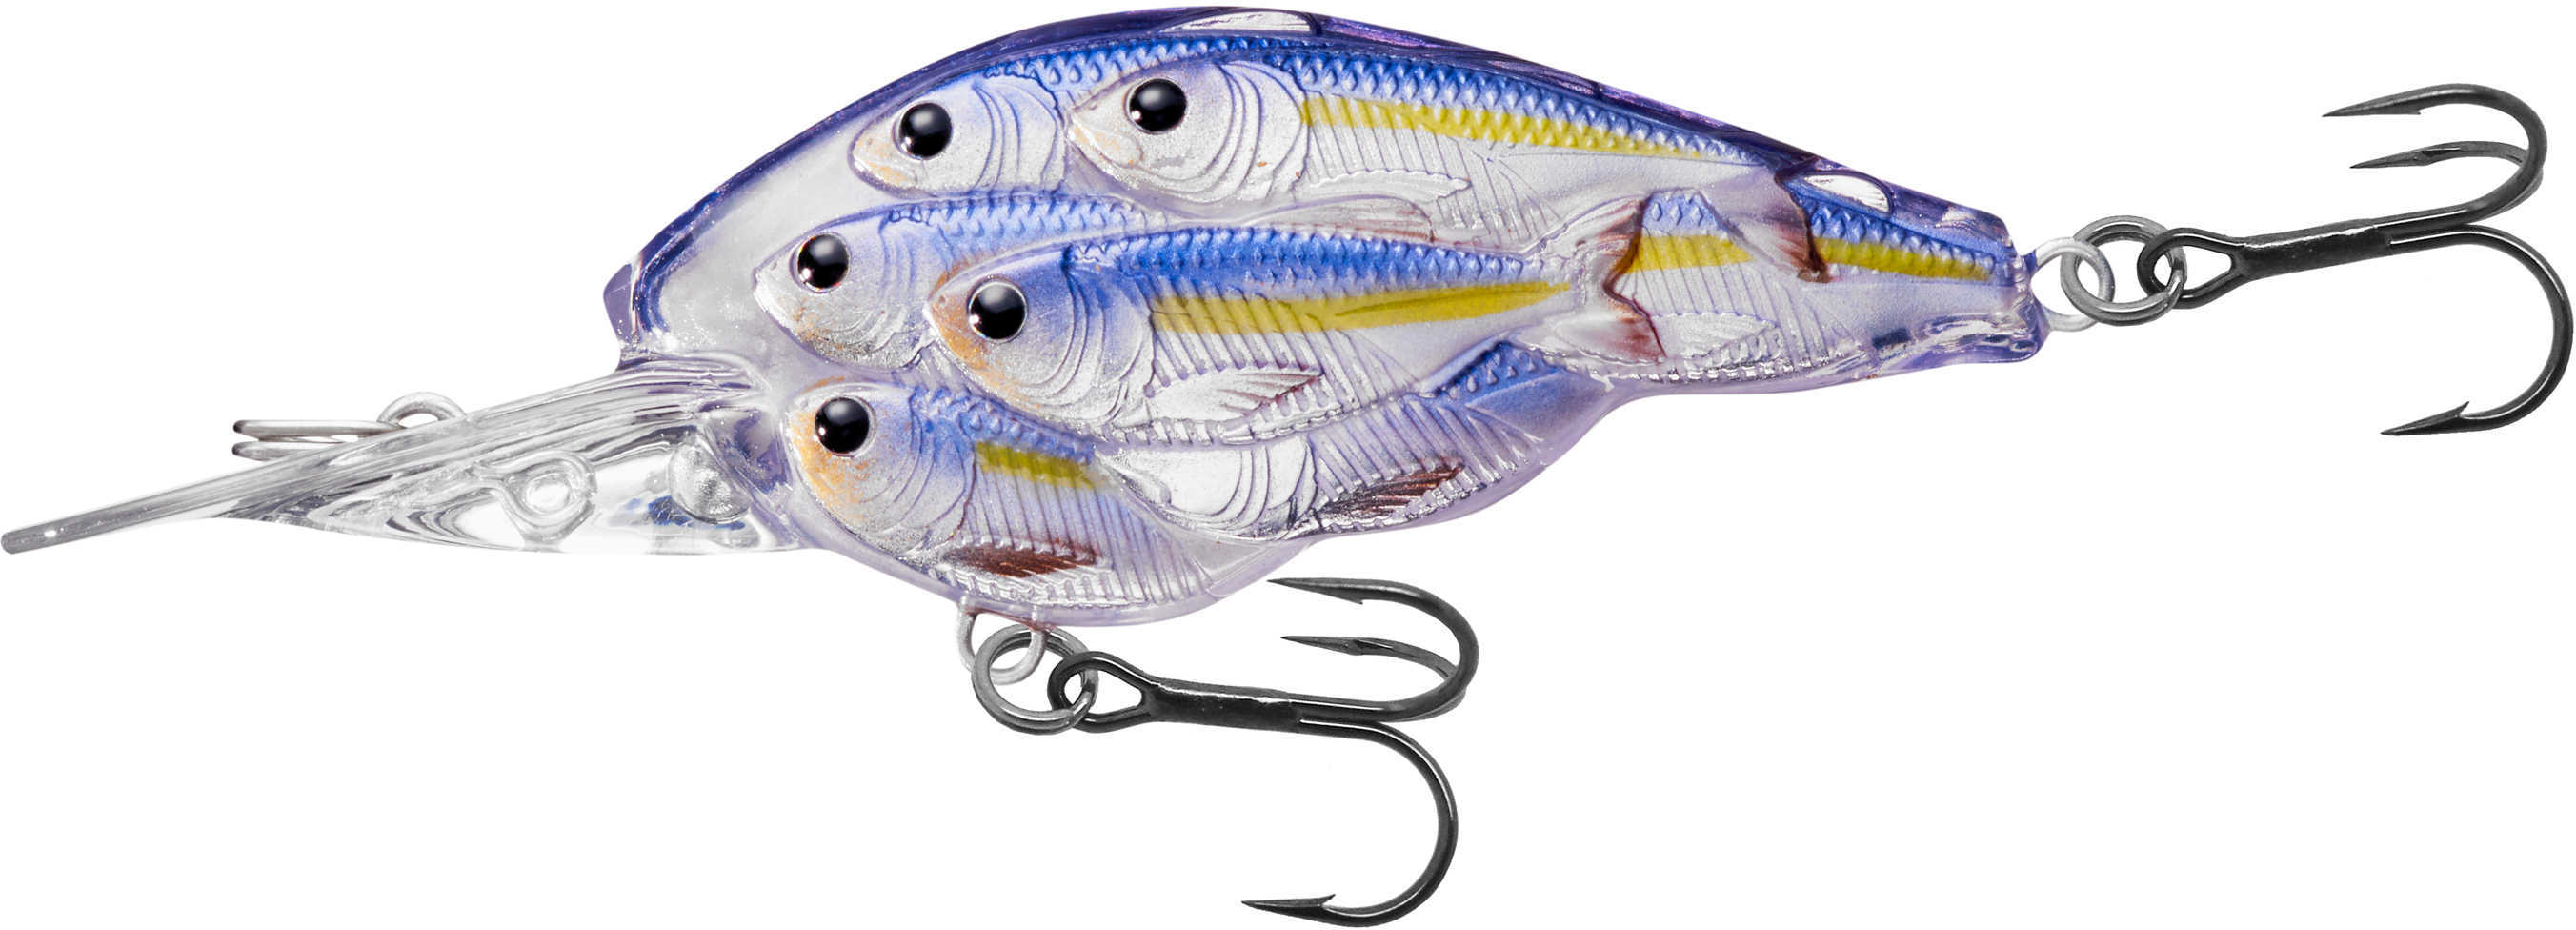 LIVETARGET Lures / Koppers Fishing and Tackle Corp Yearling Baitball Crankbait Pearl/Violet Shad #4 Md: YCB60M812